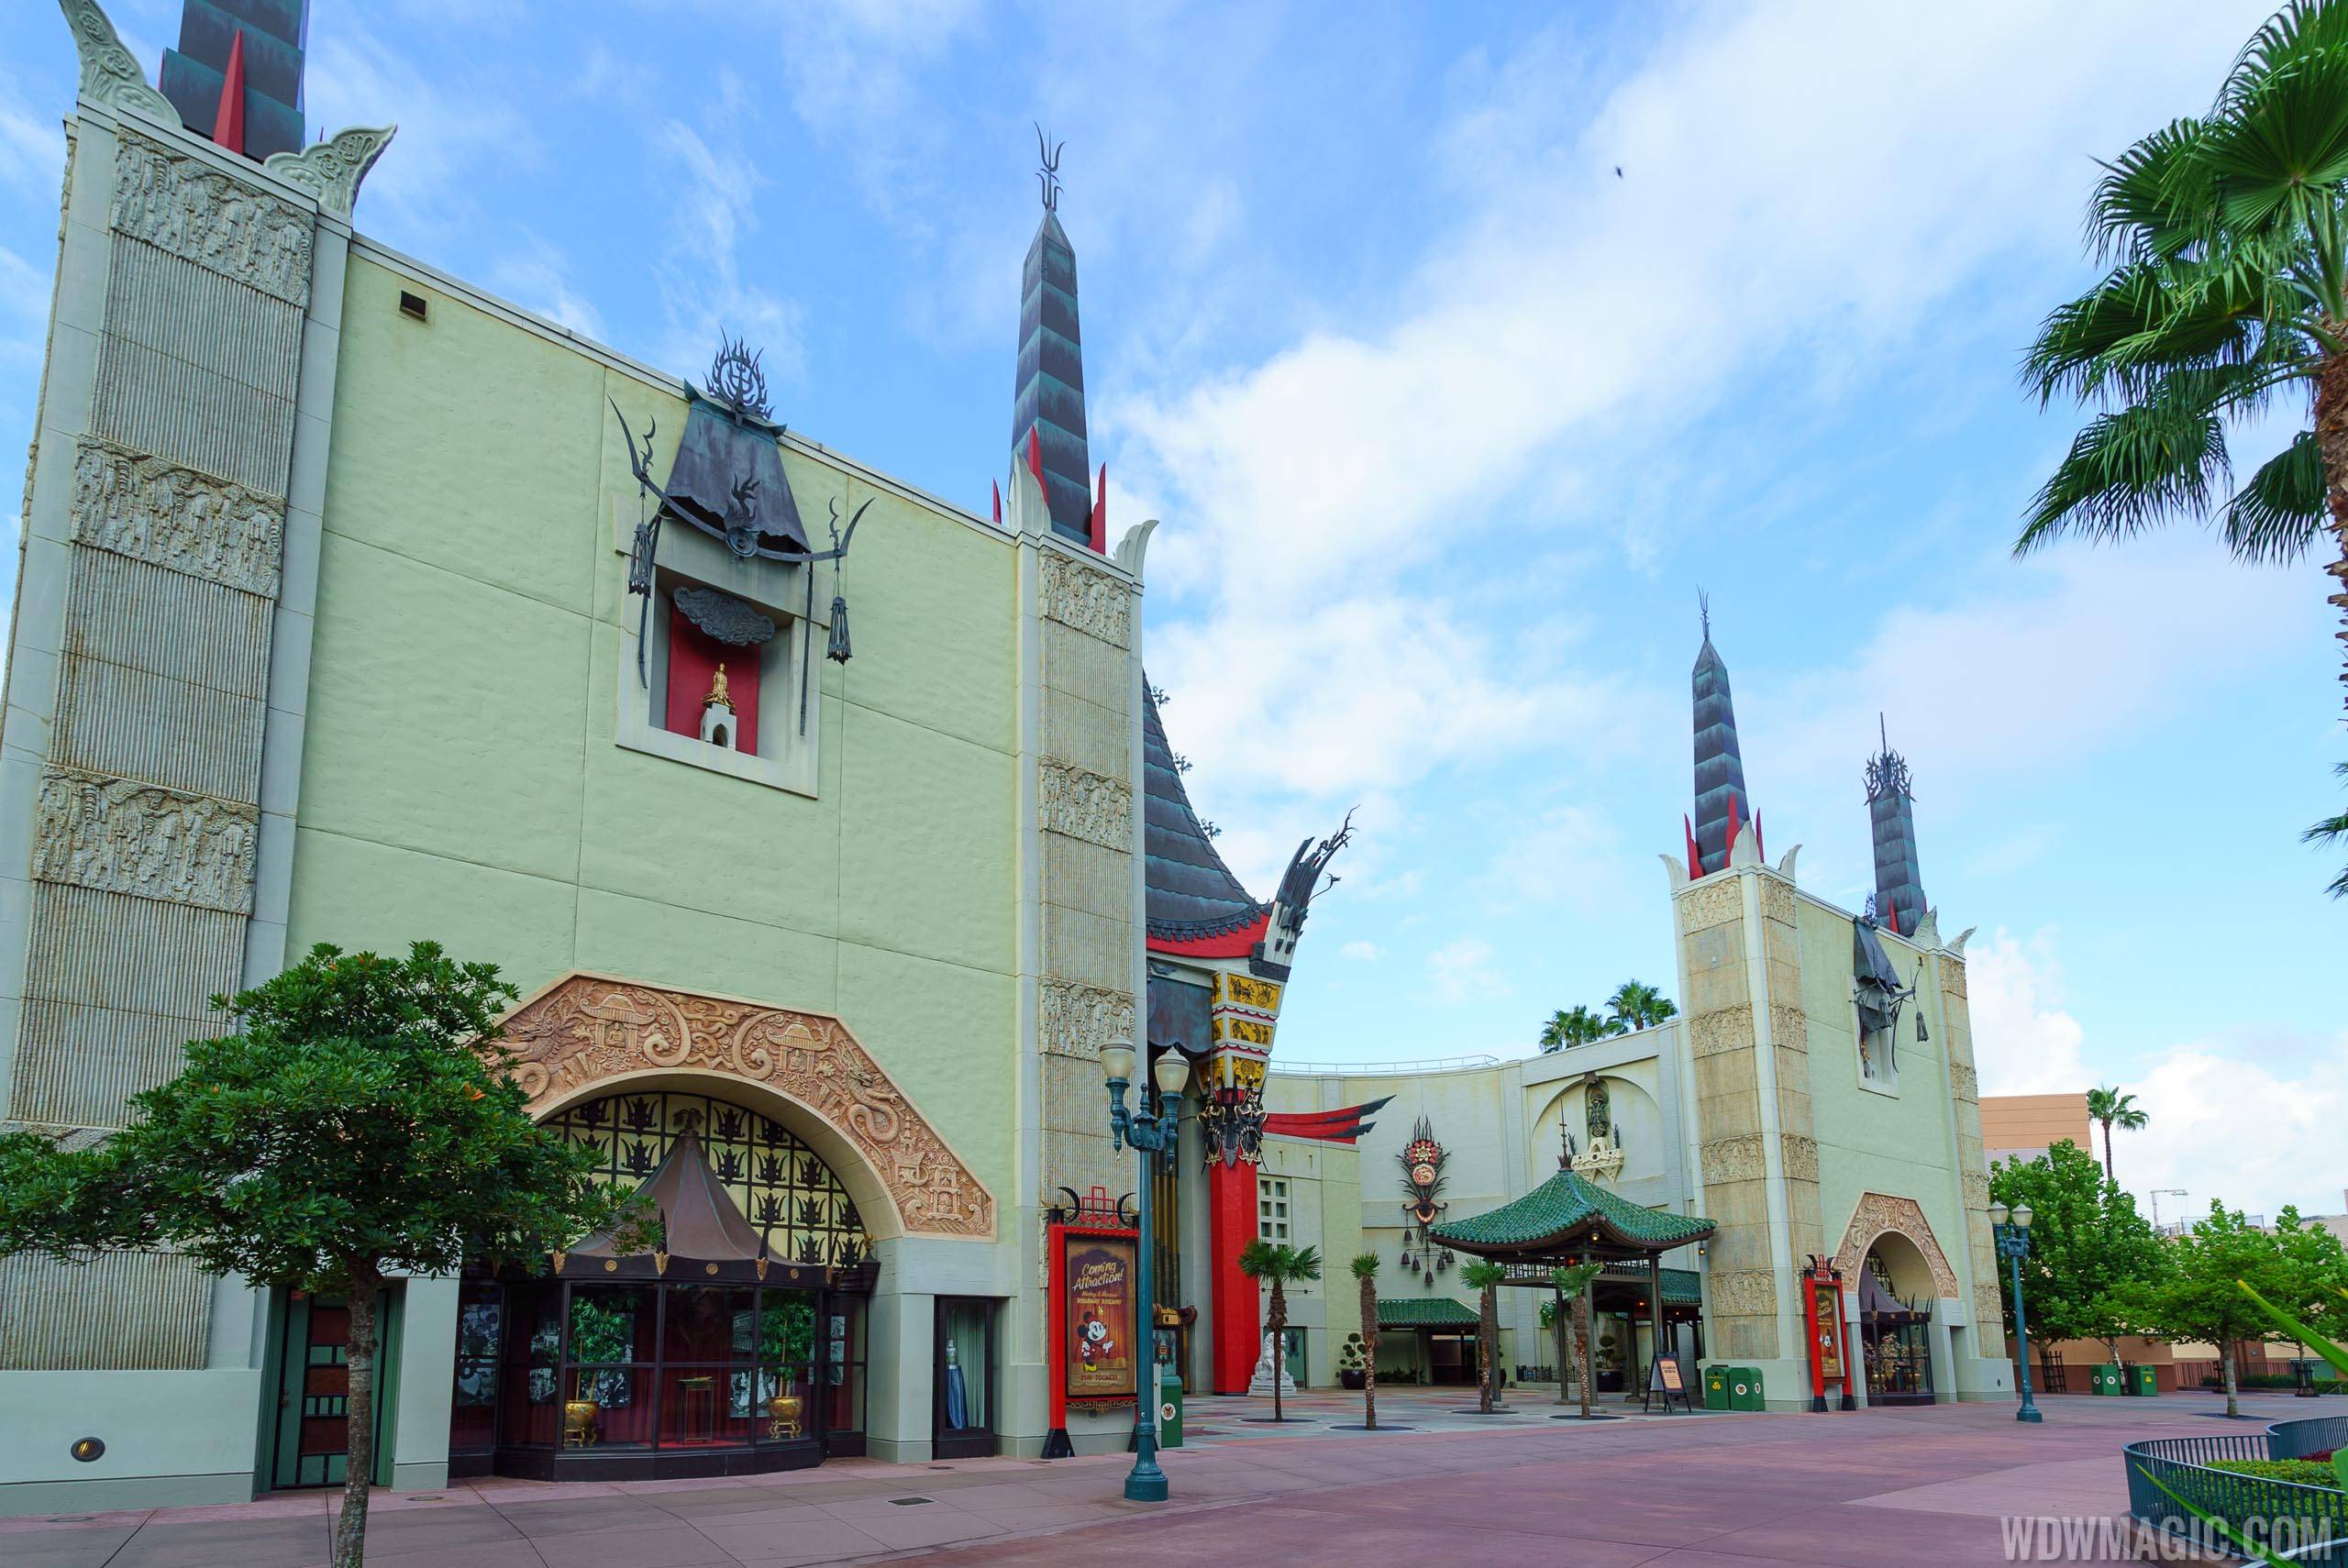 The Great Movie Ride signs removed from the Chinese Theater